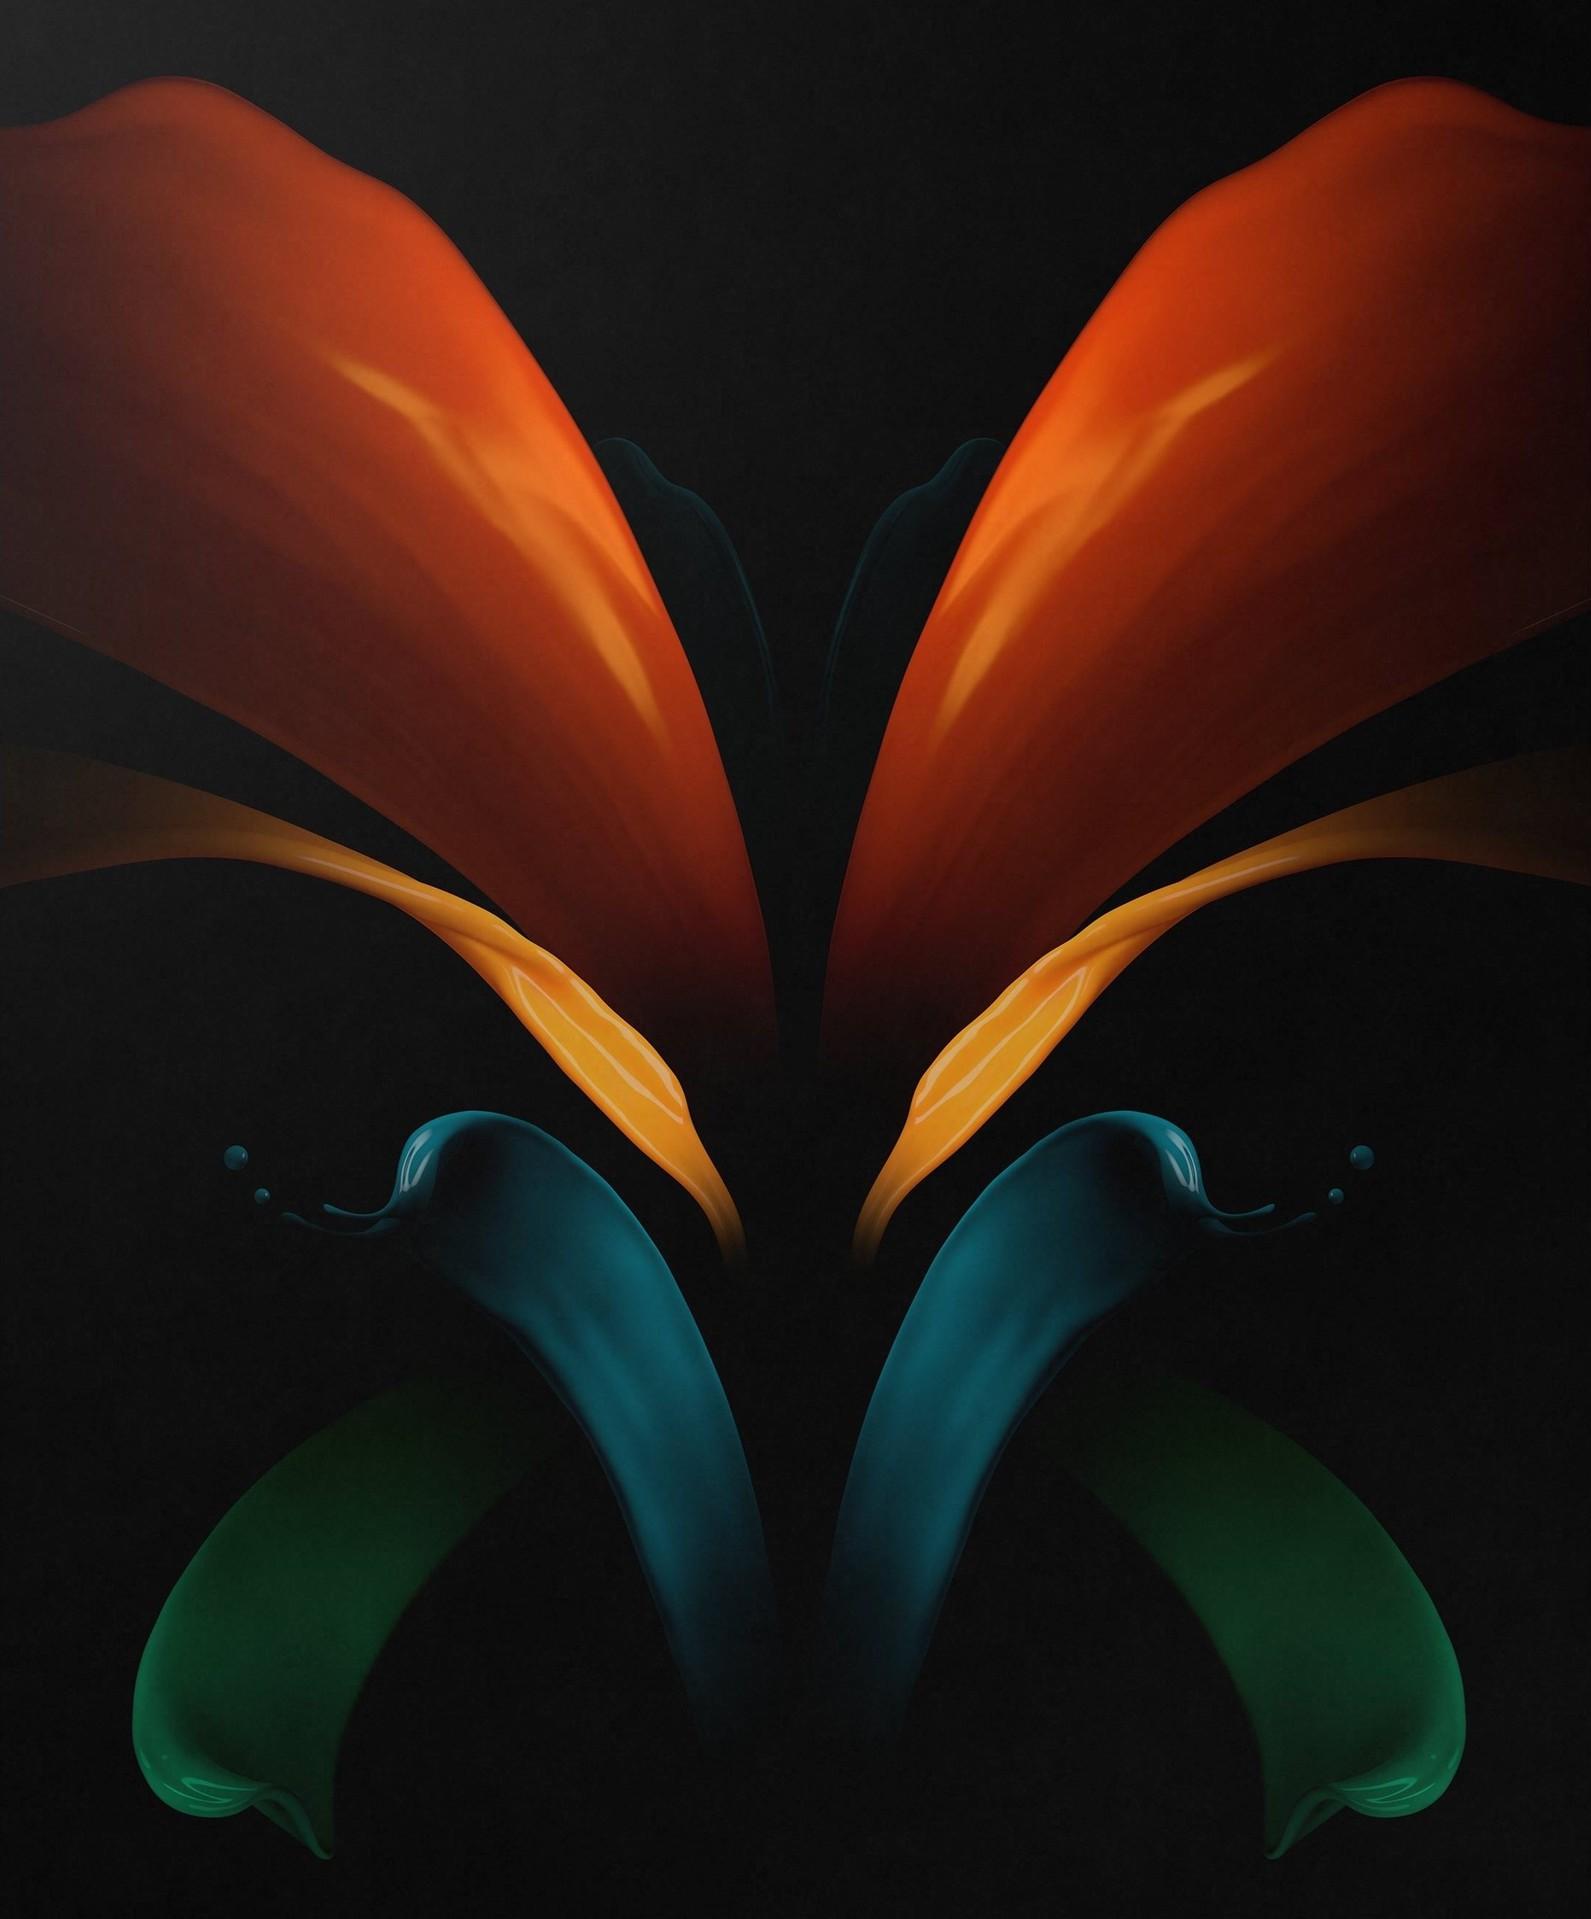 Here Are The Samsung Galaxy Z Fold Wallpaper Android Authority